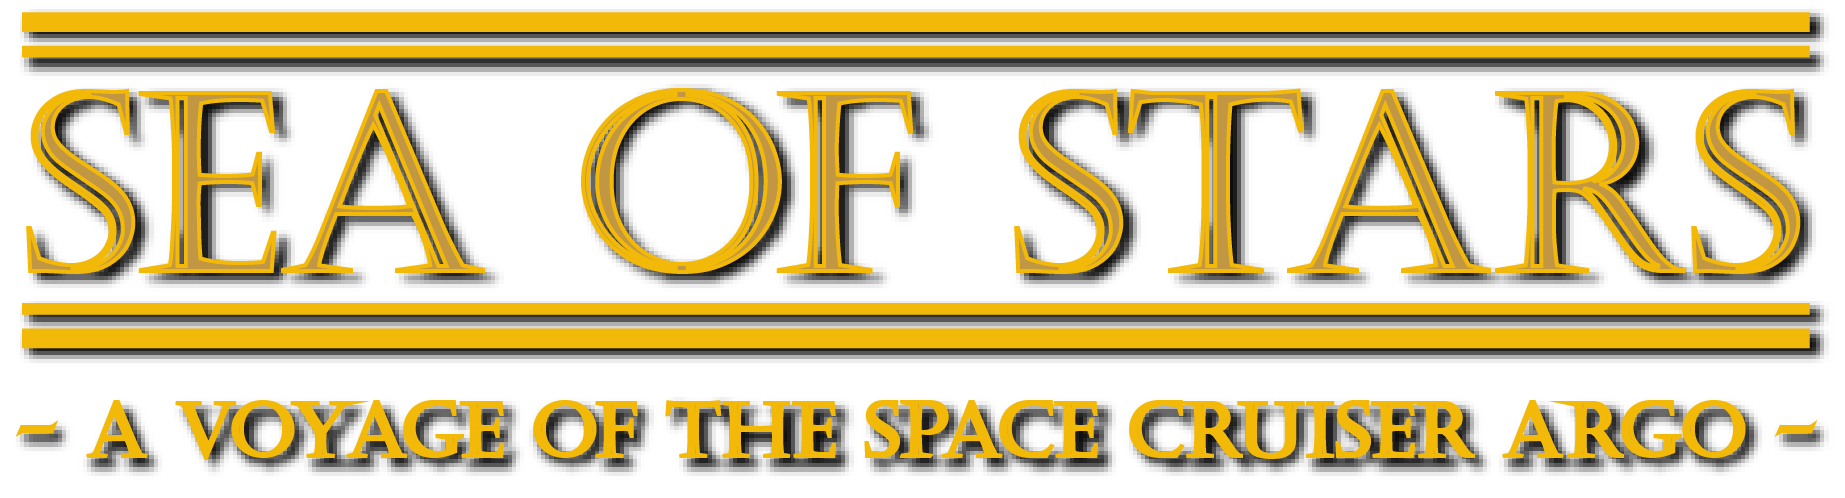 Sea of Stars: A Voyage of the Space Cruiser Argo logo